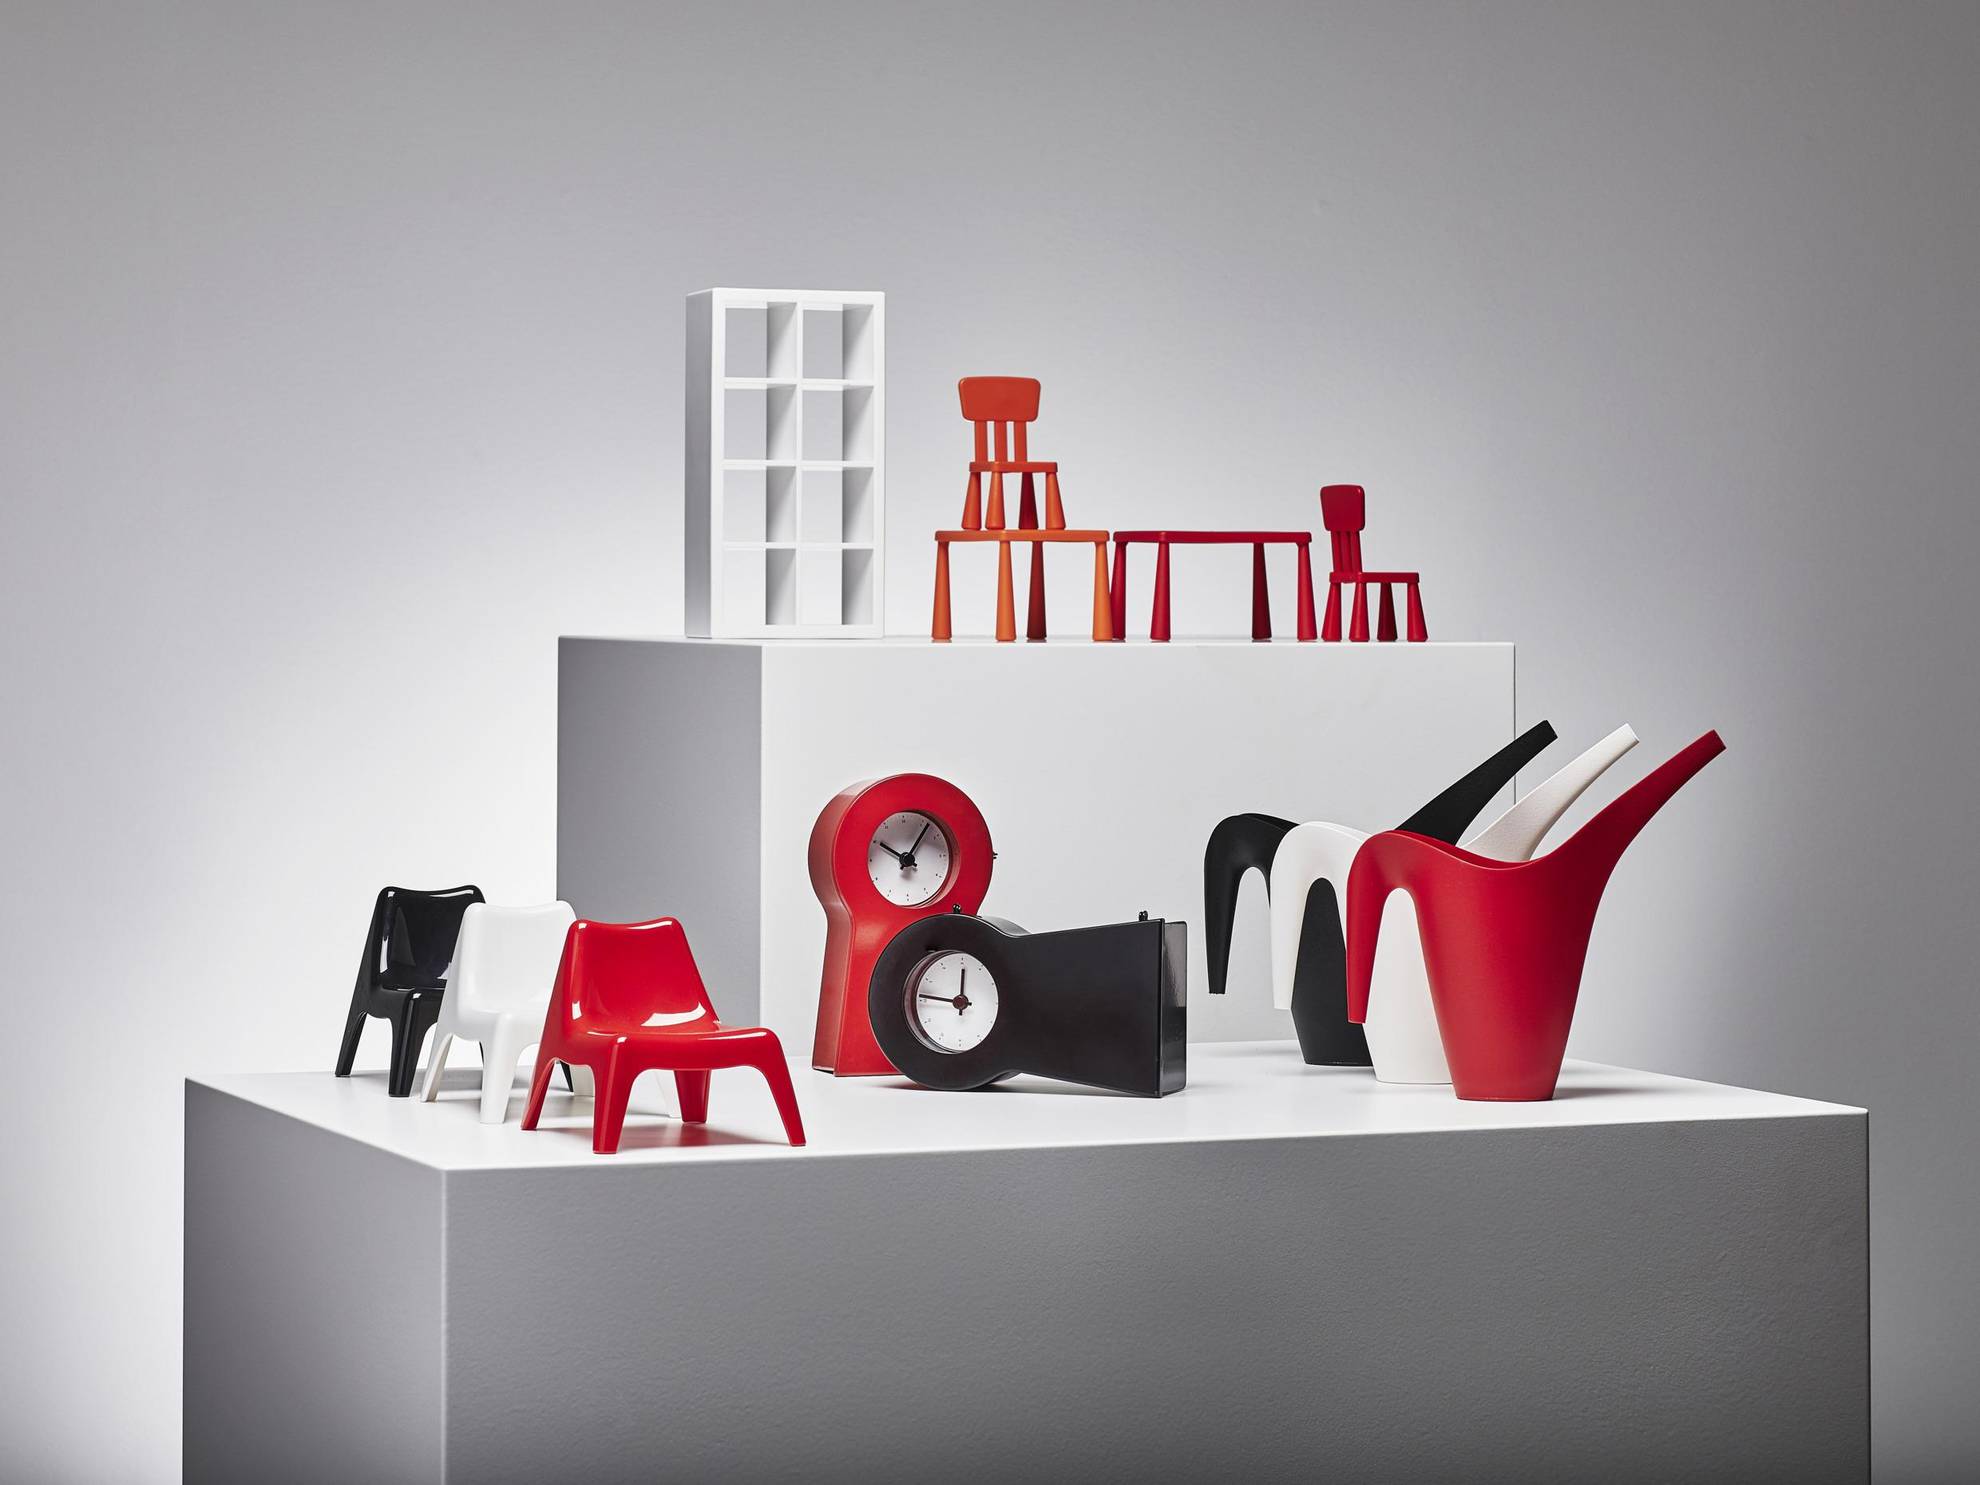 Small plastic stools and tables, watches and watering pots displayed on a white area.